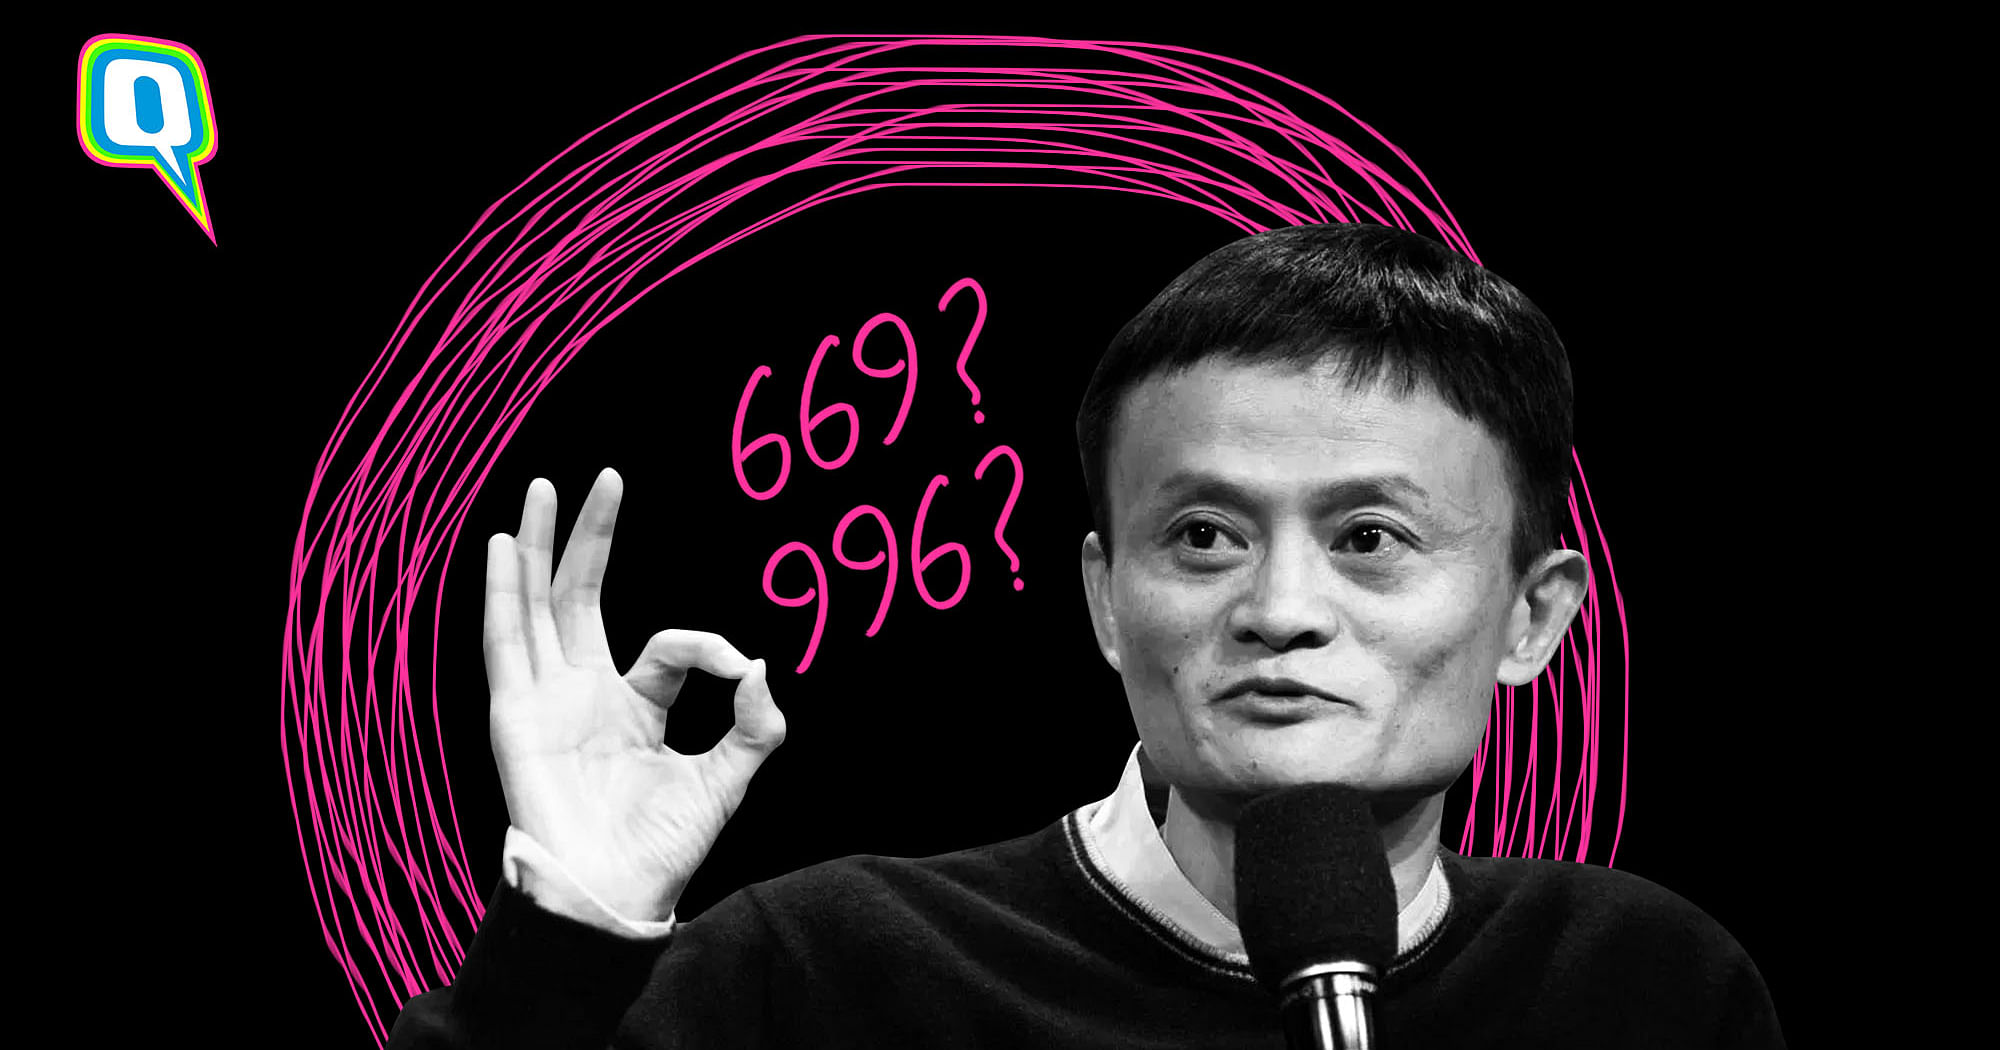 Alibabas Jack Ma 669 Or 996 6 Reasons Why Jack Mas 669 Will Never Work Sex Six Times In